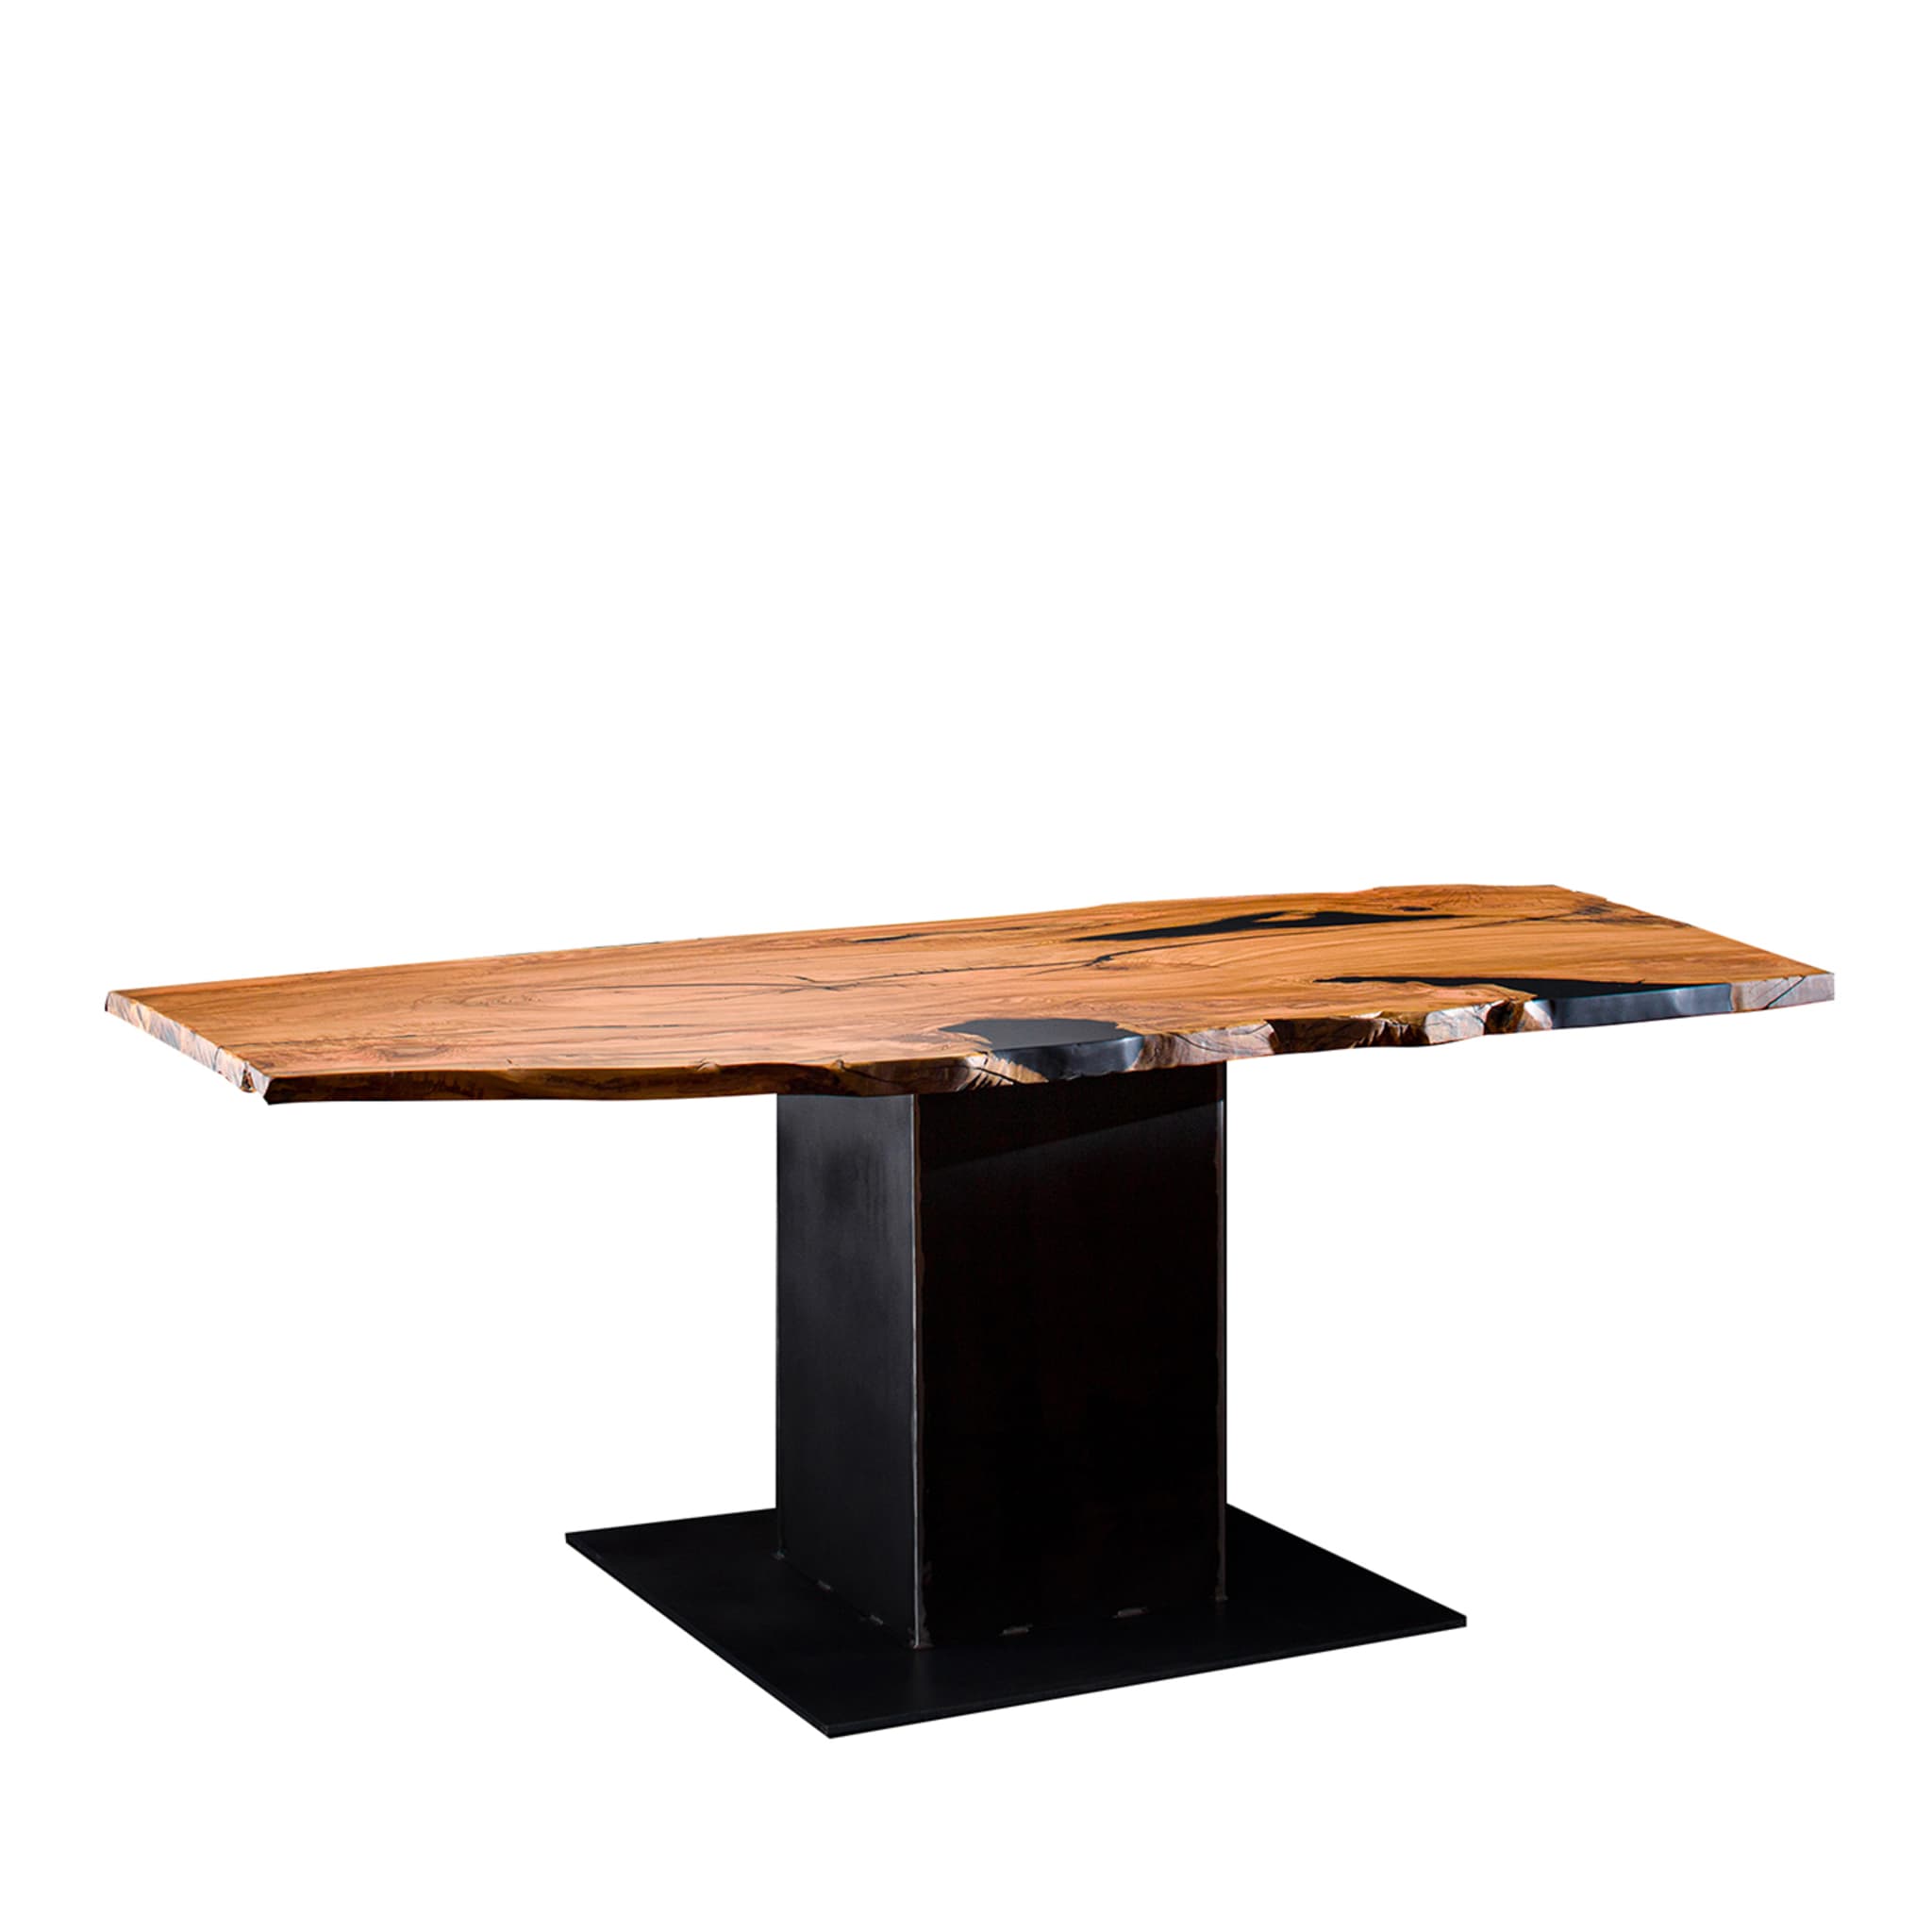 Olive wood dining table - Main view